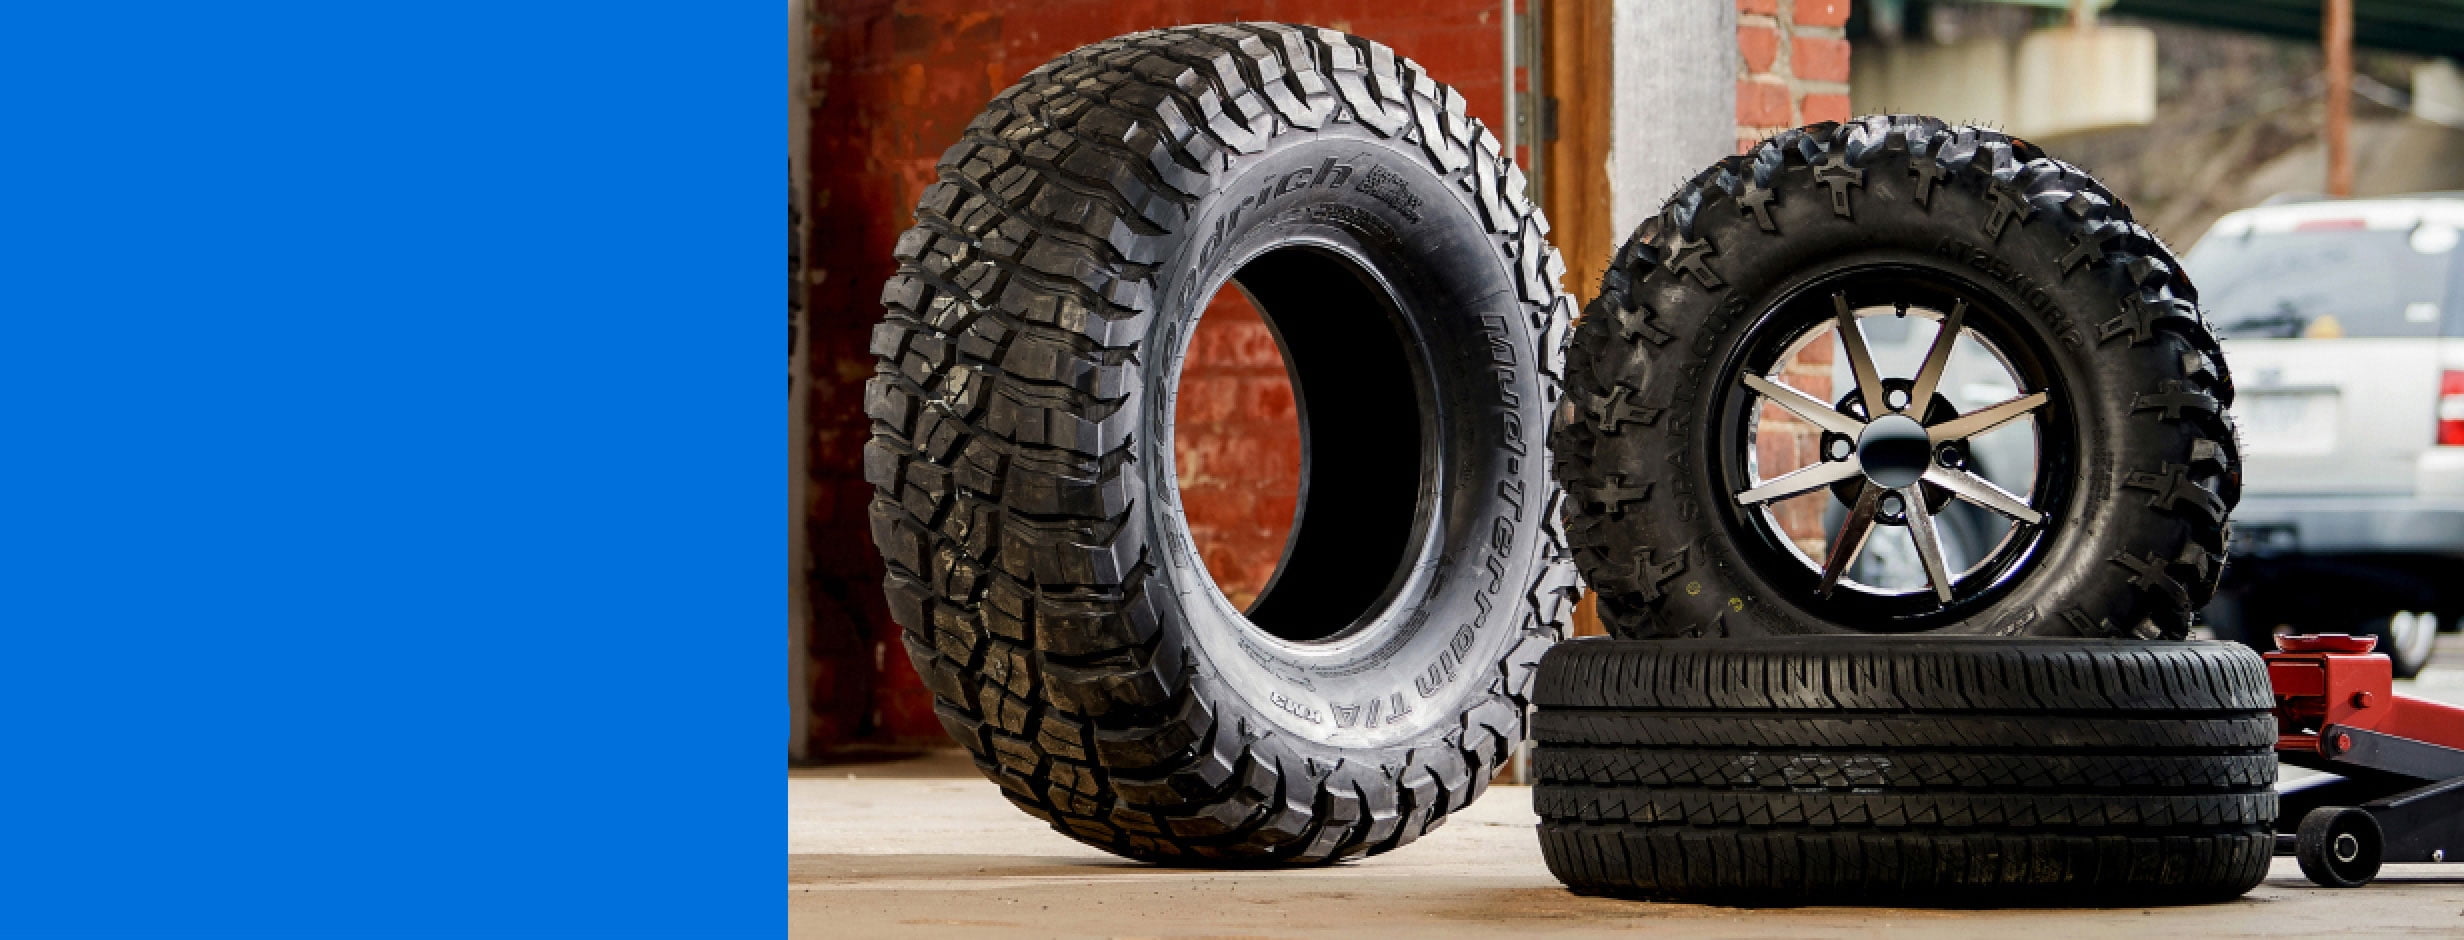 Walmart Tire Warranty Explained 2022 (What's Covered + Price)